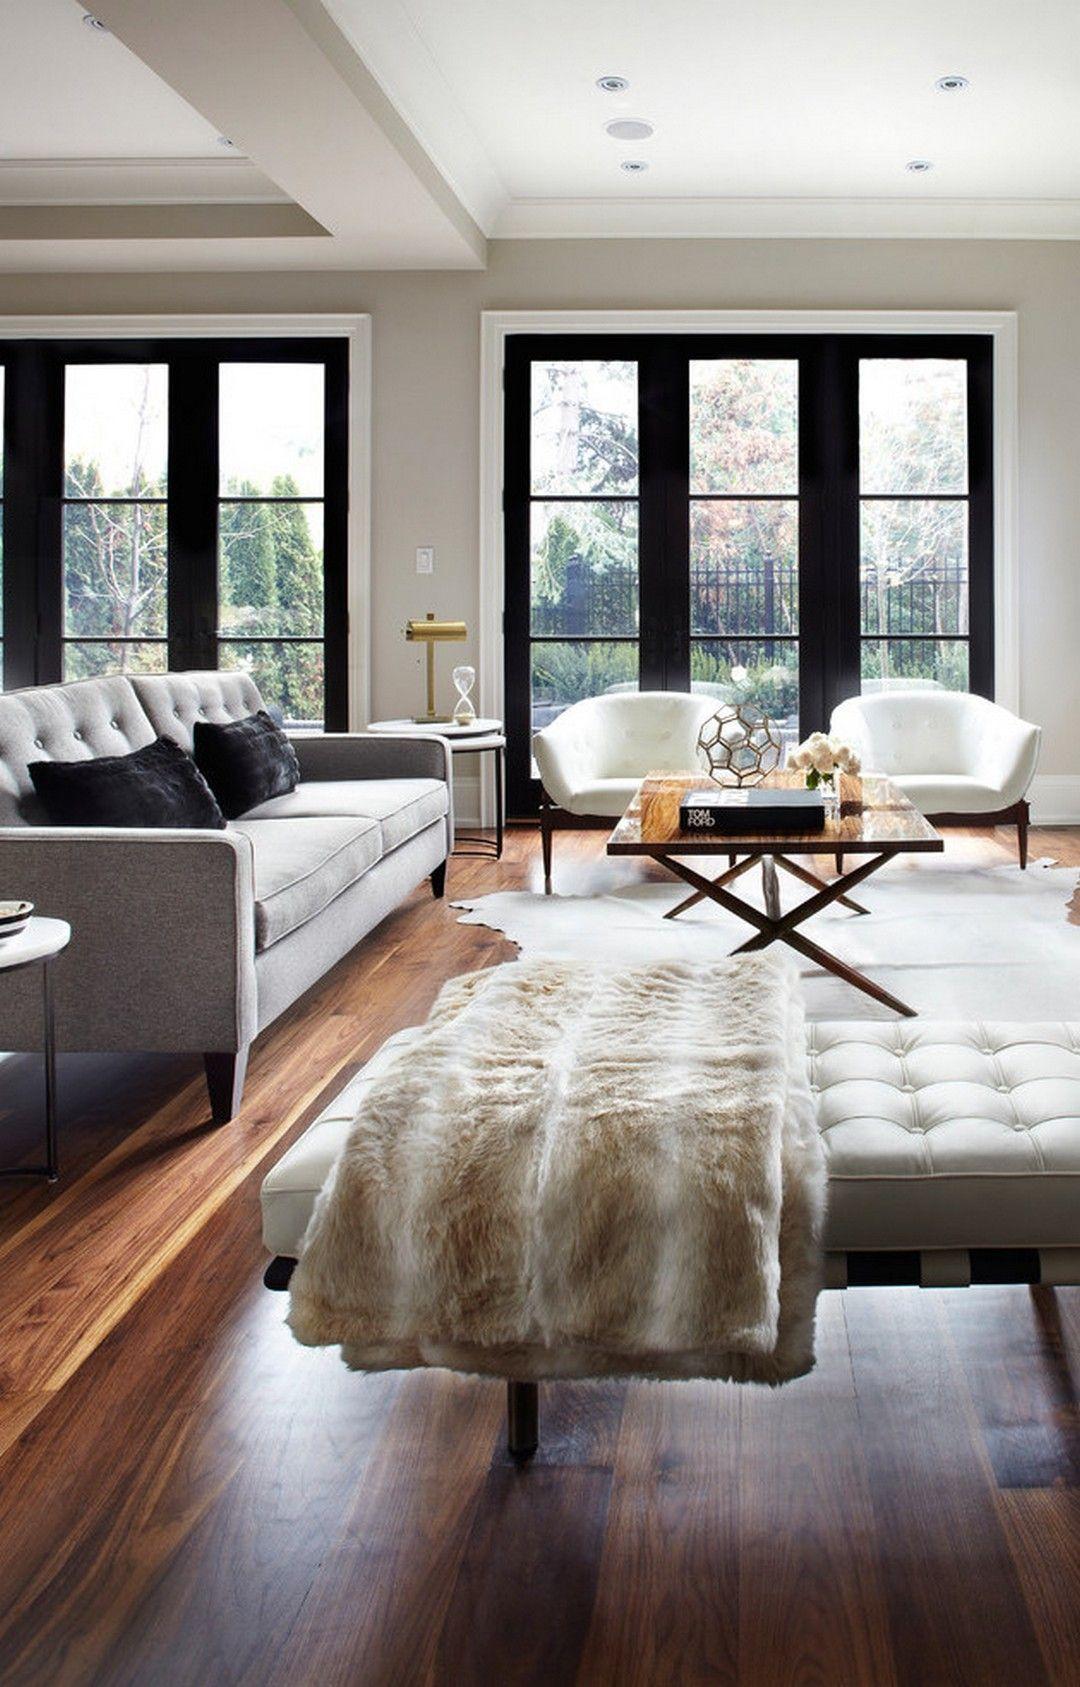 3 Ways to Design a Timeless Gender-Neutral Home